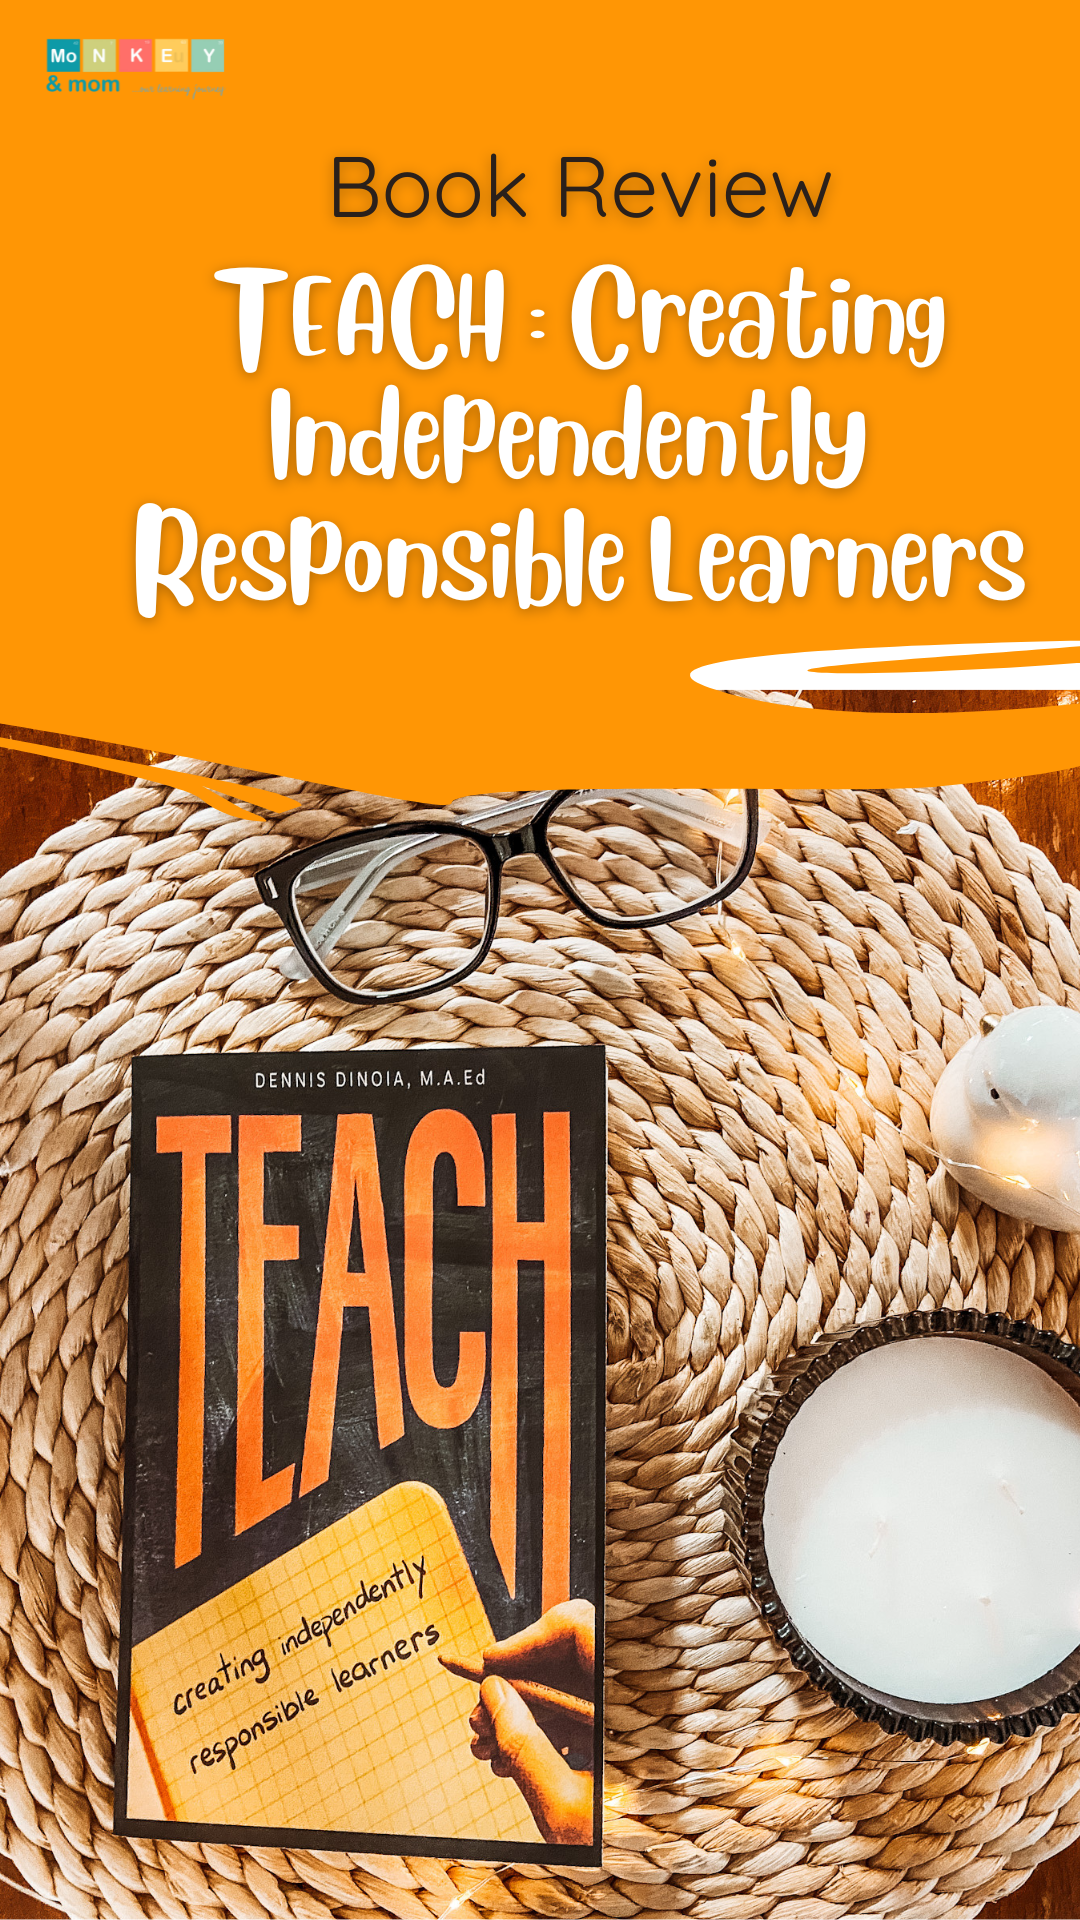 Teach creating independently responsible learners by dennis dinoia review, must-read books for homeschoolers